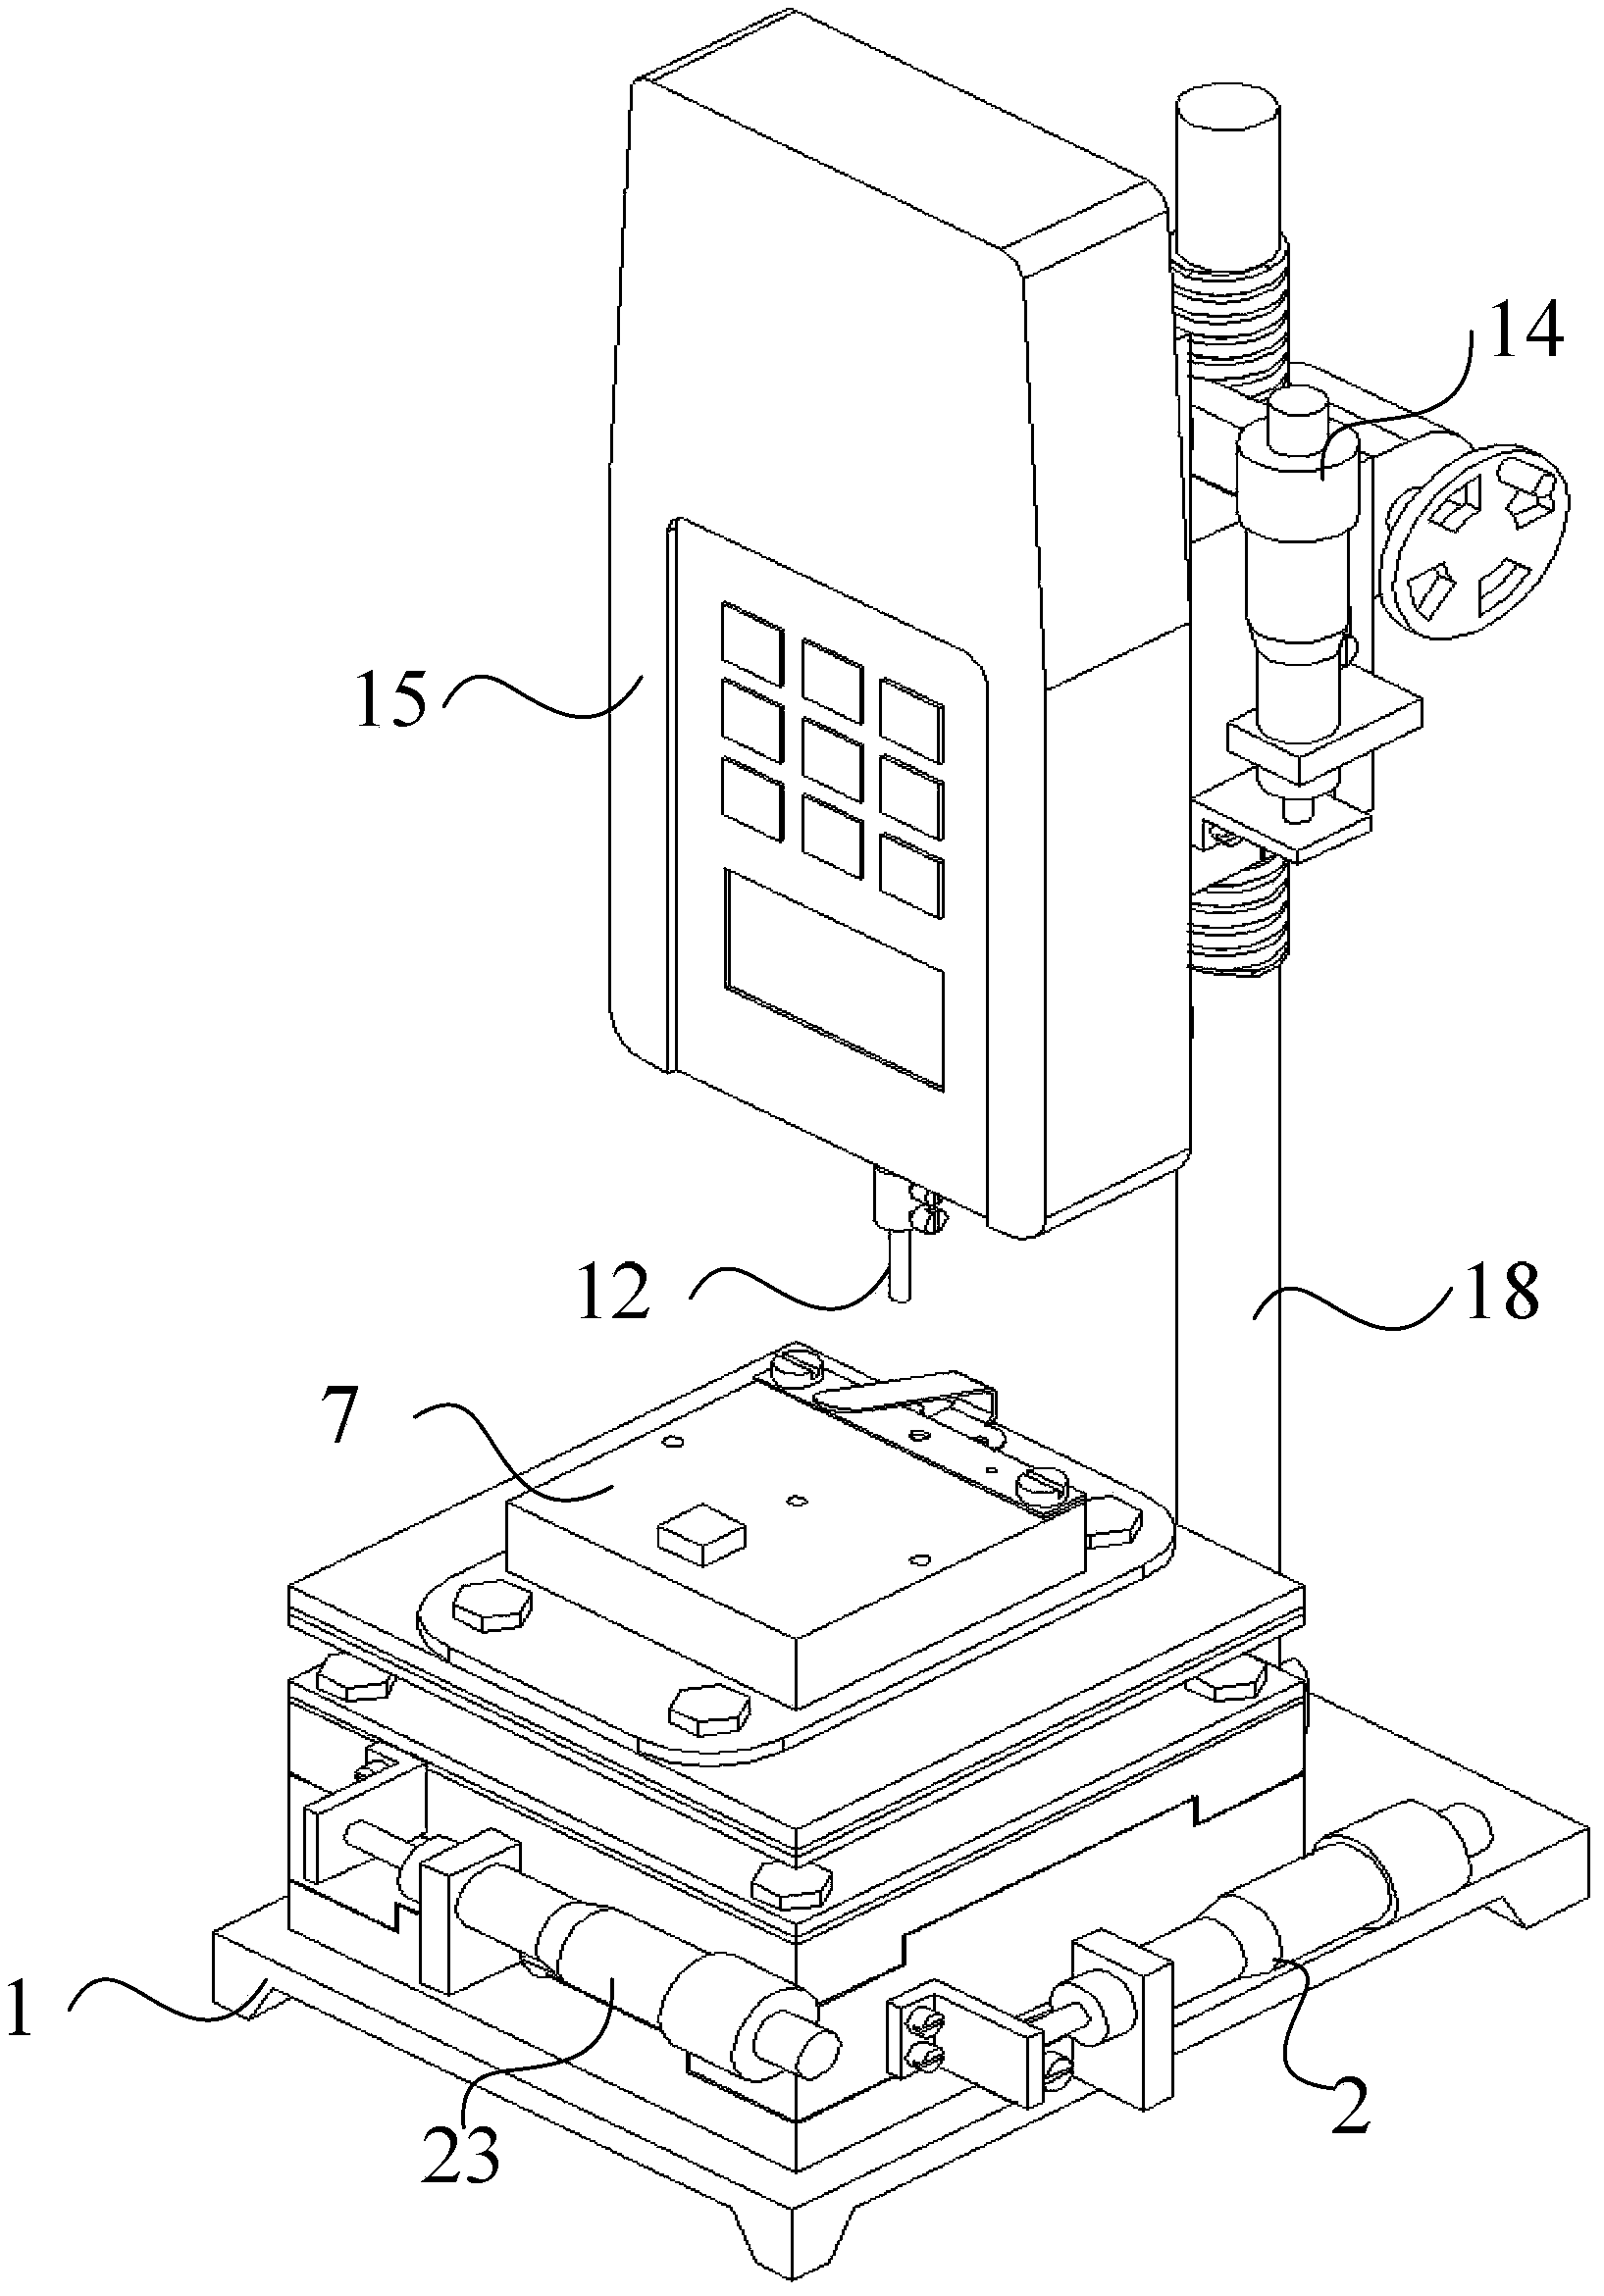 Device for testing rigidity of plate spring in high-temperature environment